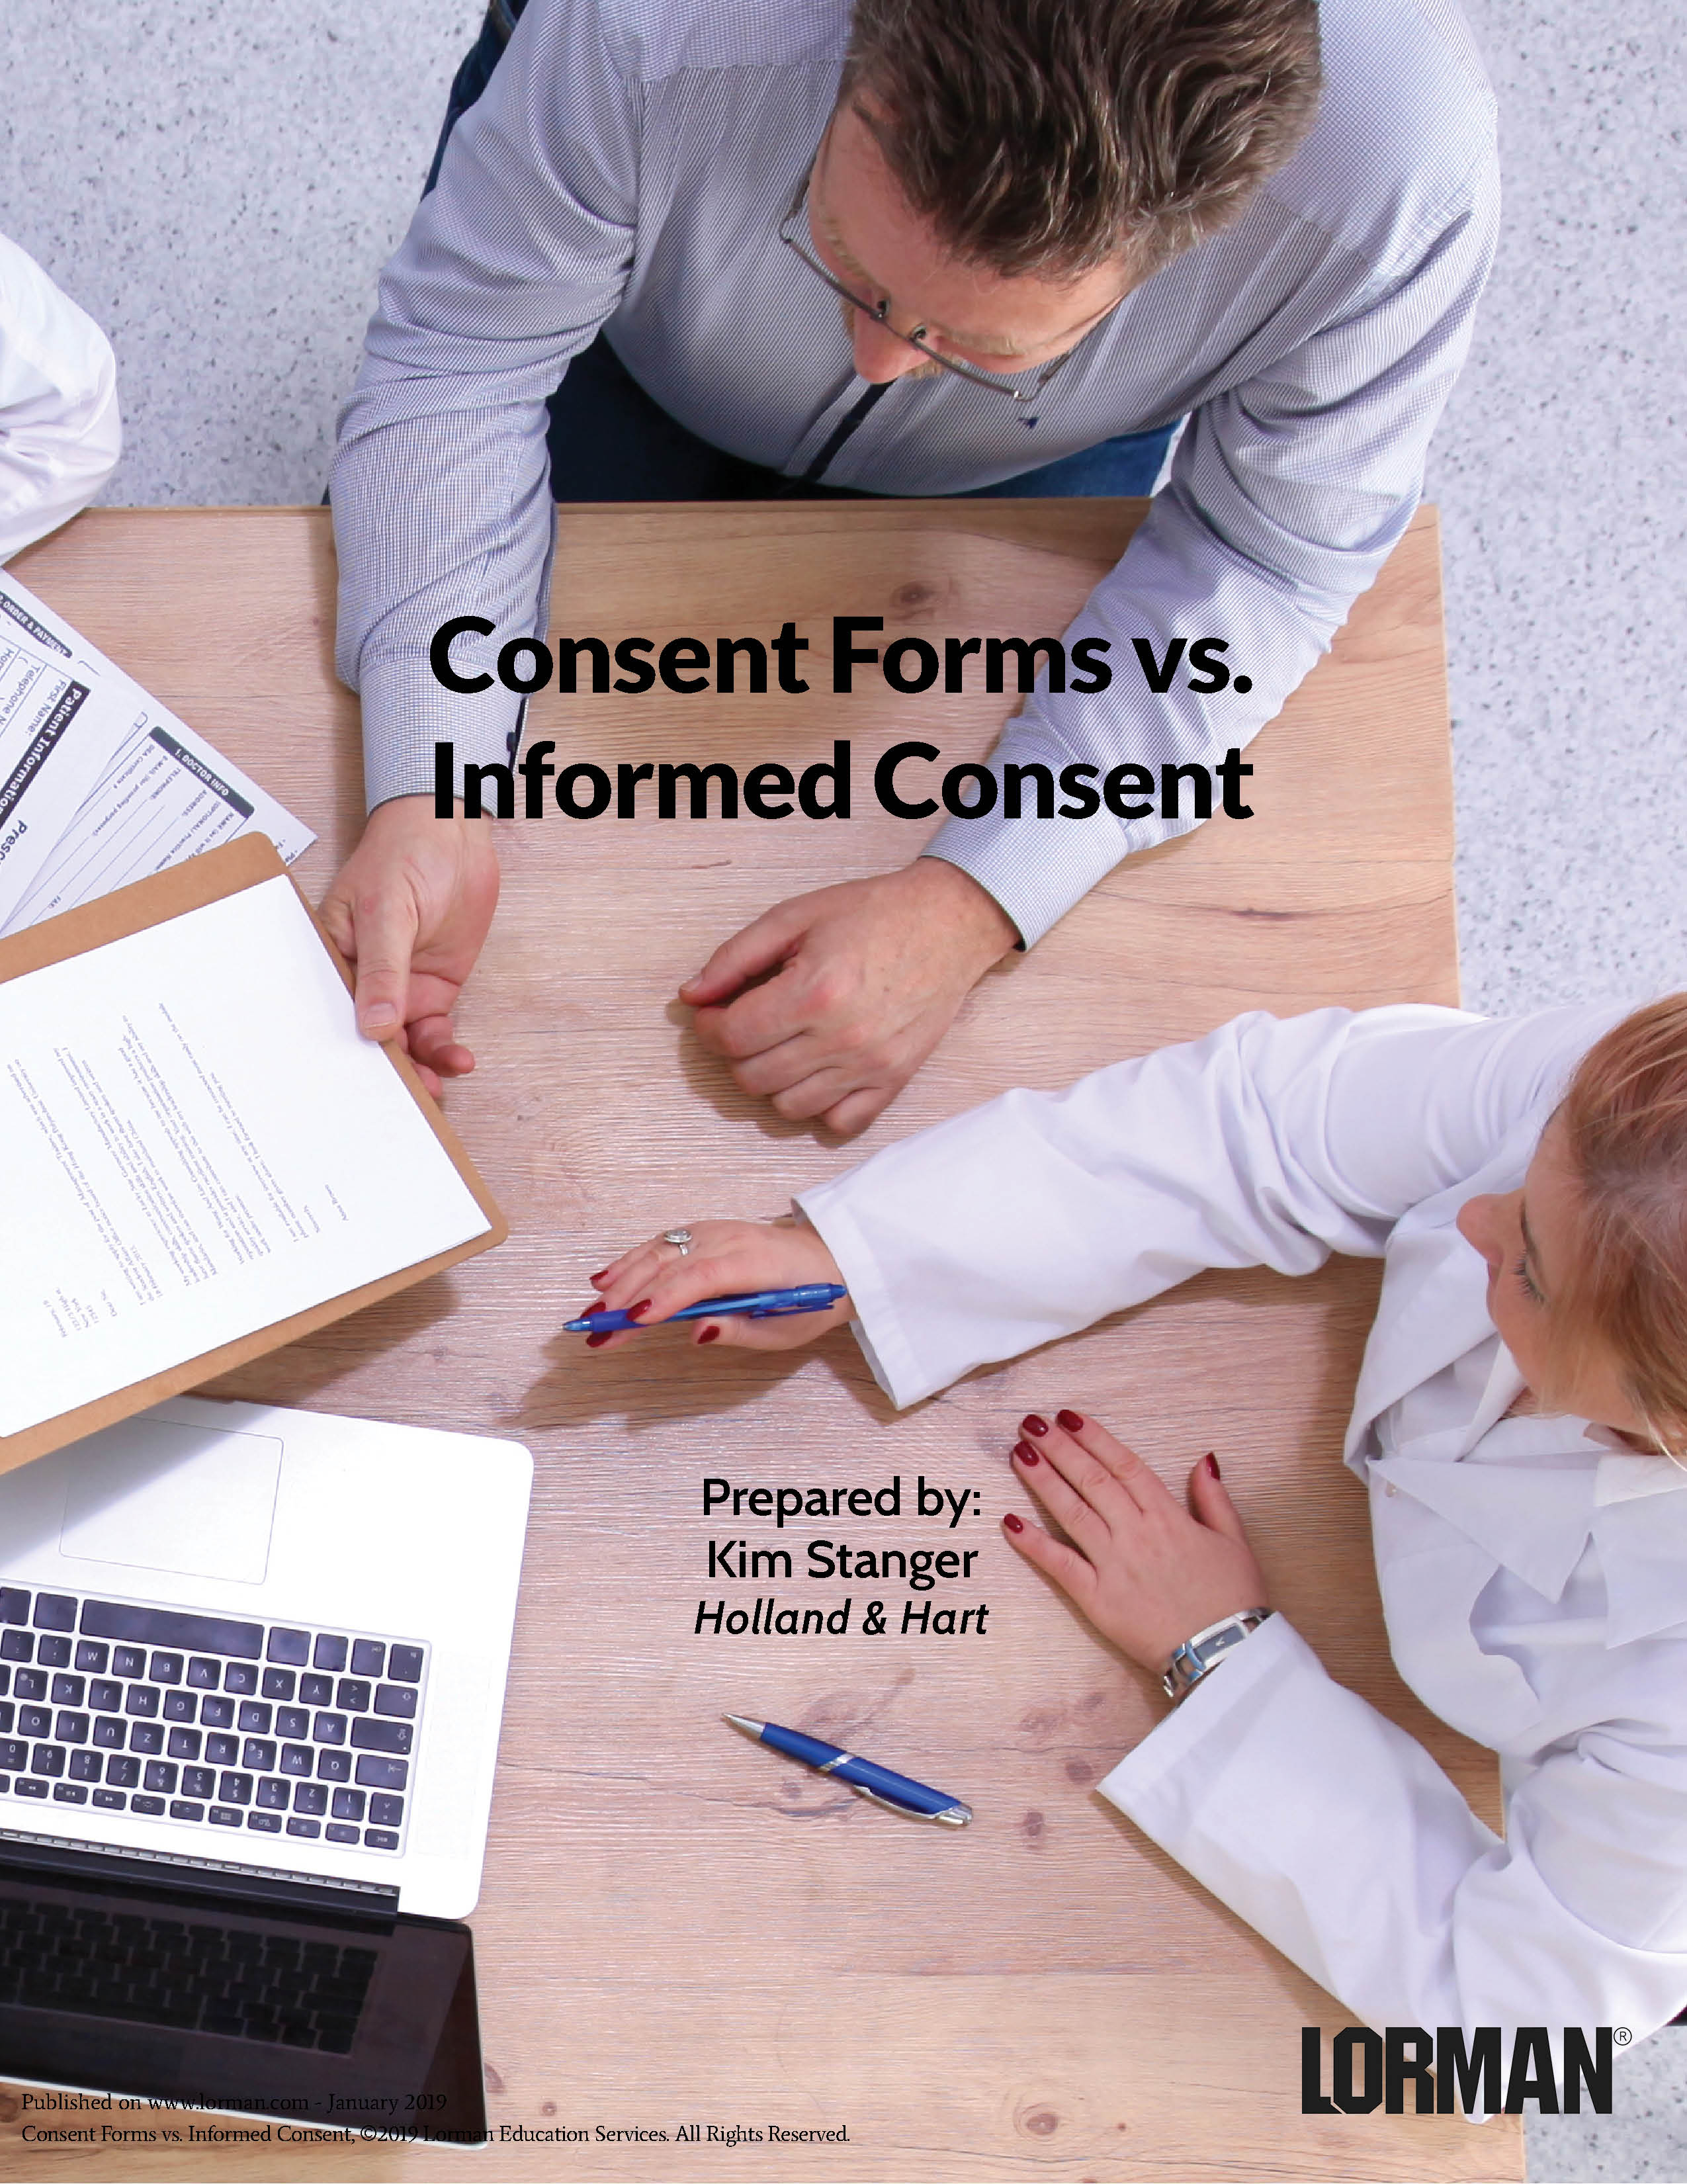 Consent Forms vs. Informed Consent